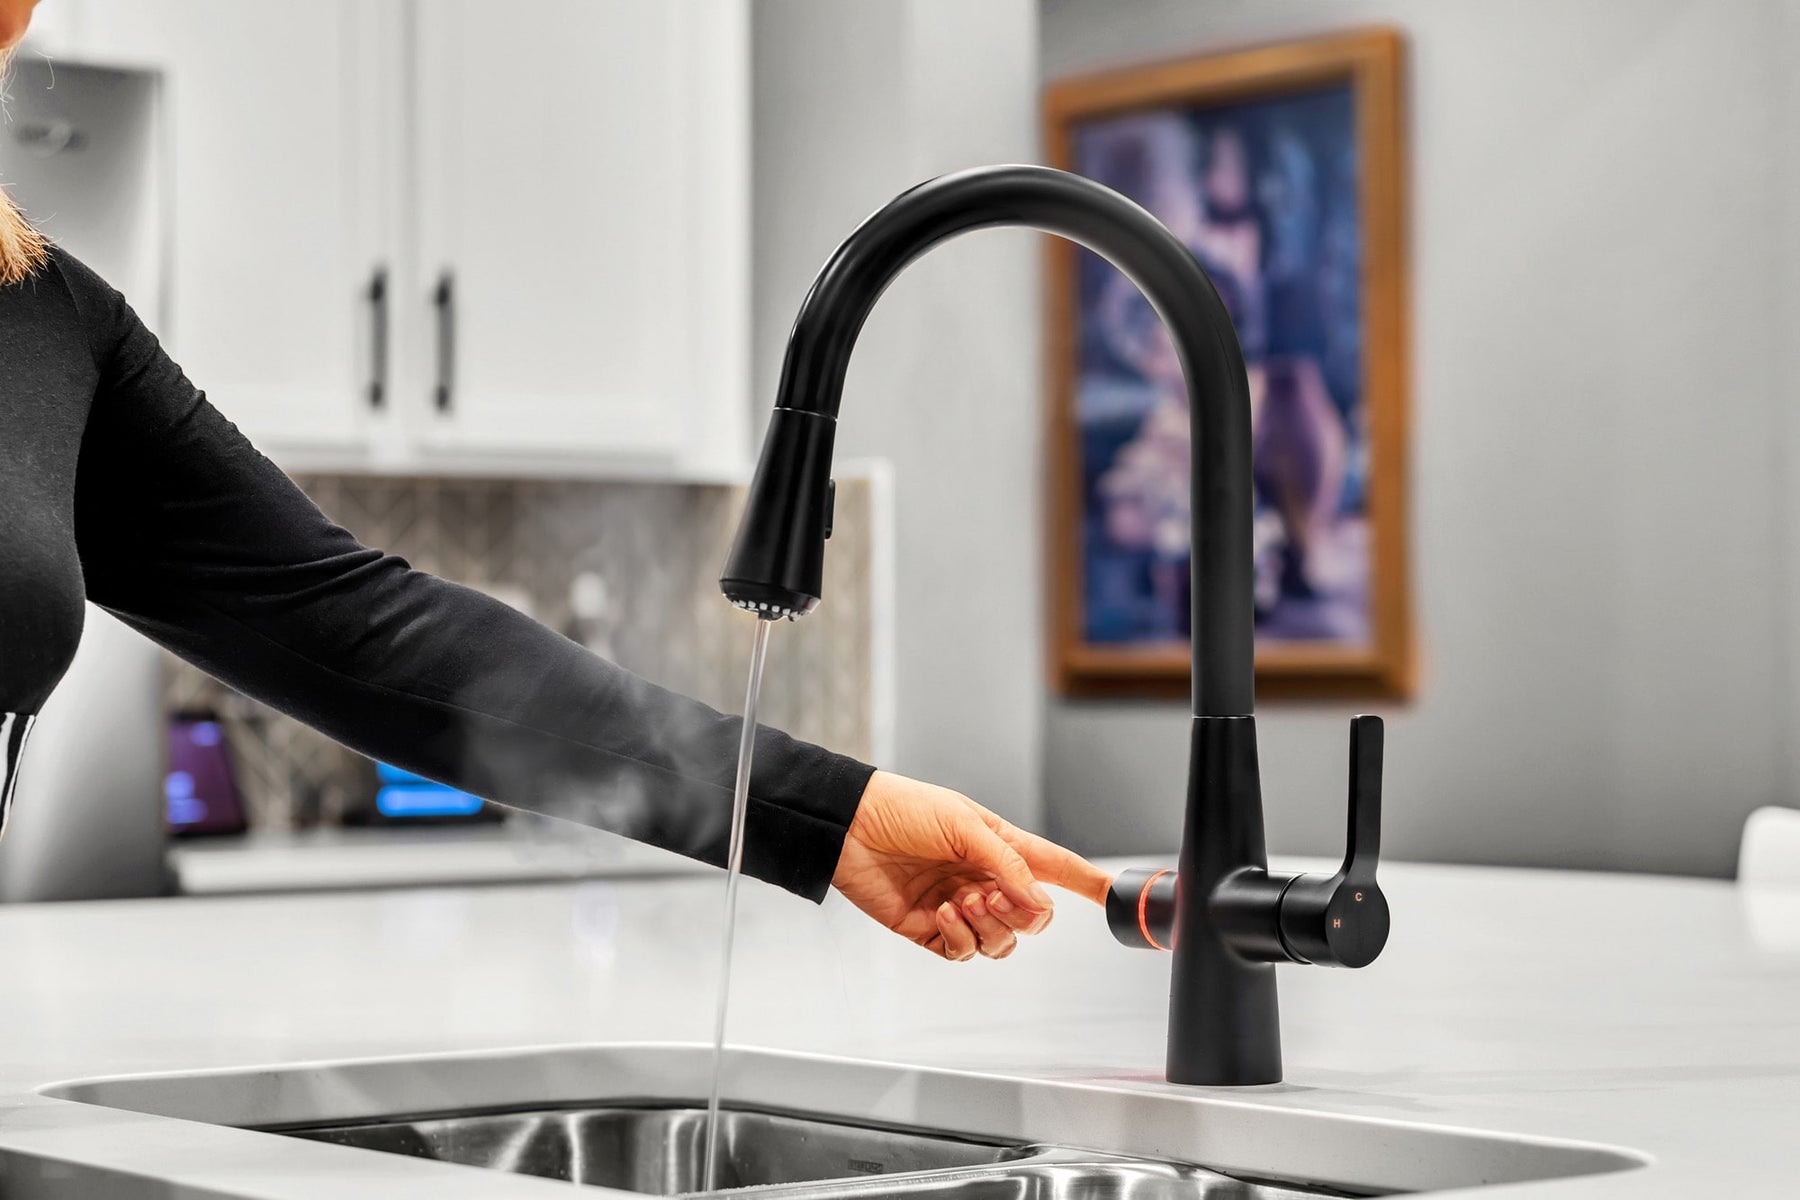 Instant hot water, filtered water, full-flow tap, and pull-down spray. All-in-one faucet for home, RV, and marine sinks.